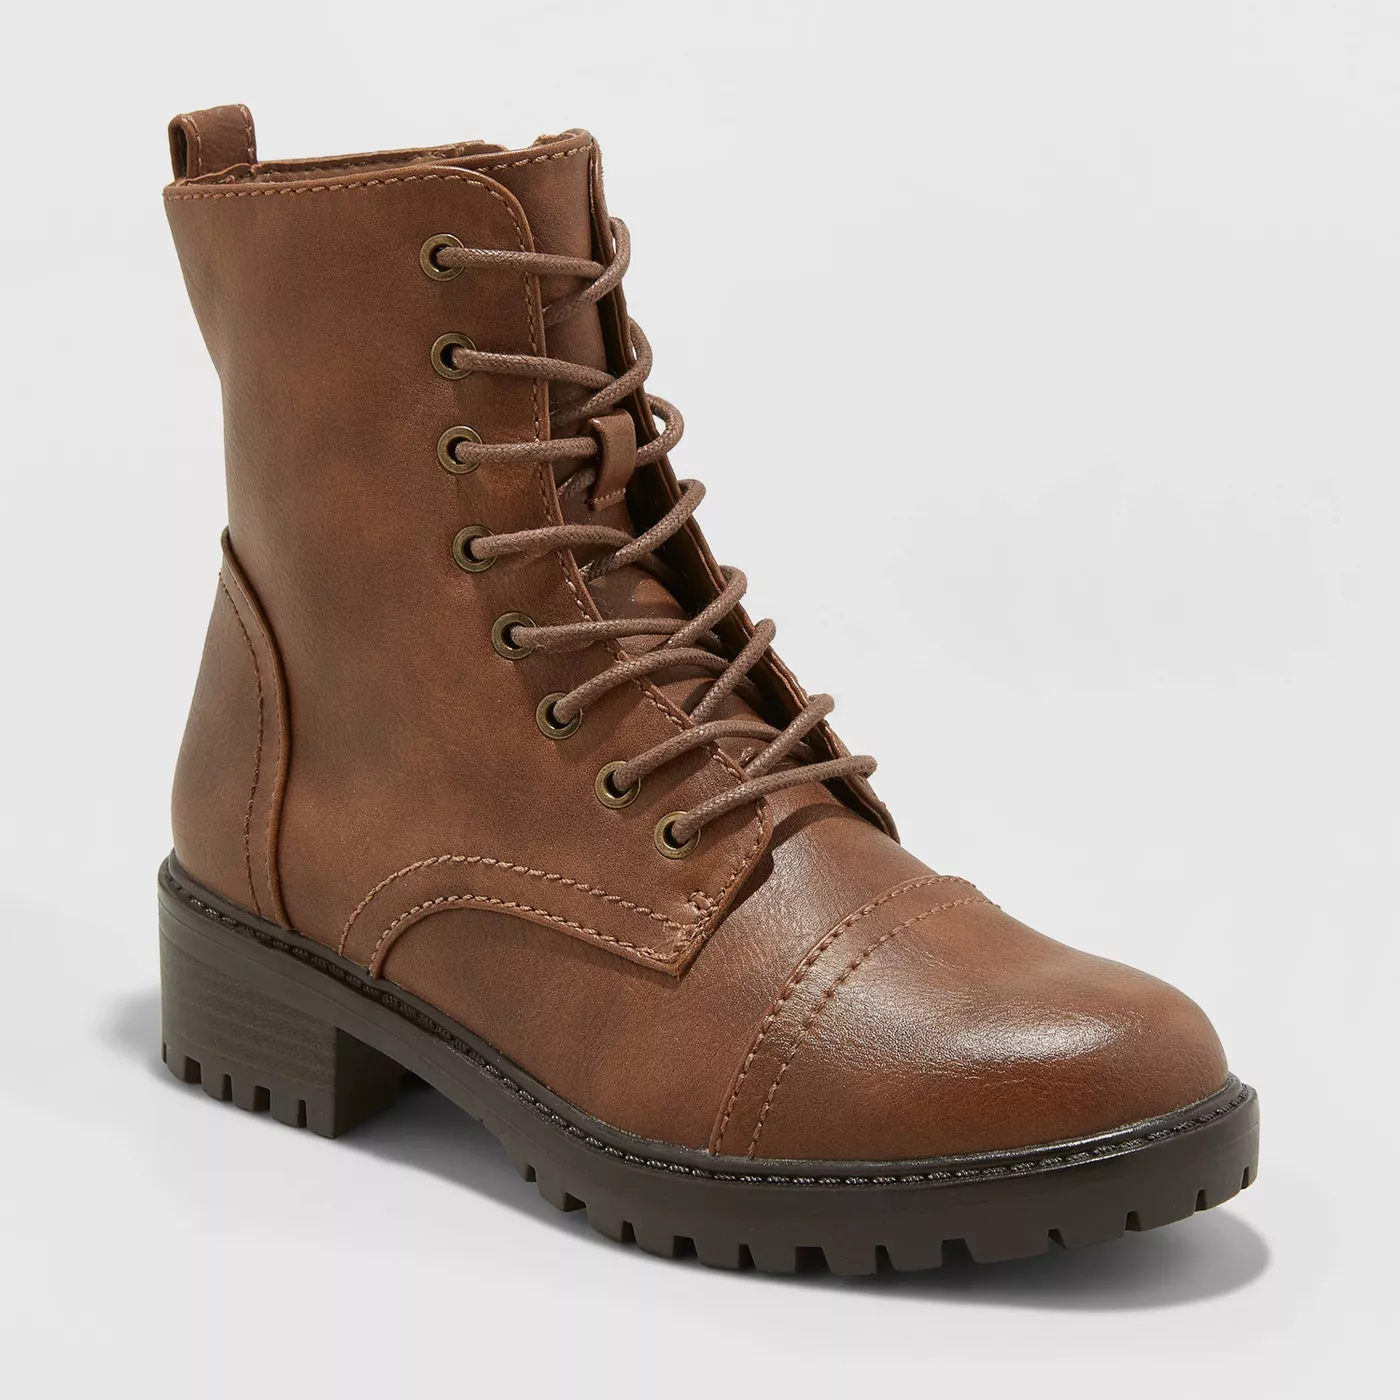 Women's Kamryn Faux Leather Combat Boot - Universal Thread™ - image 1 of 12